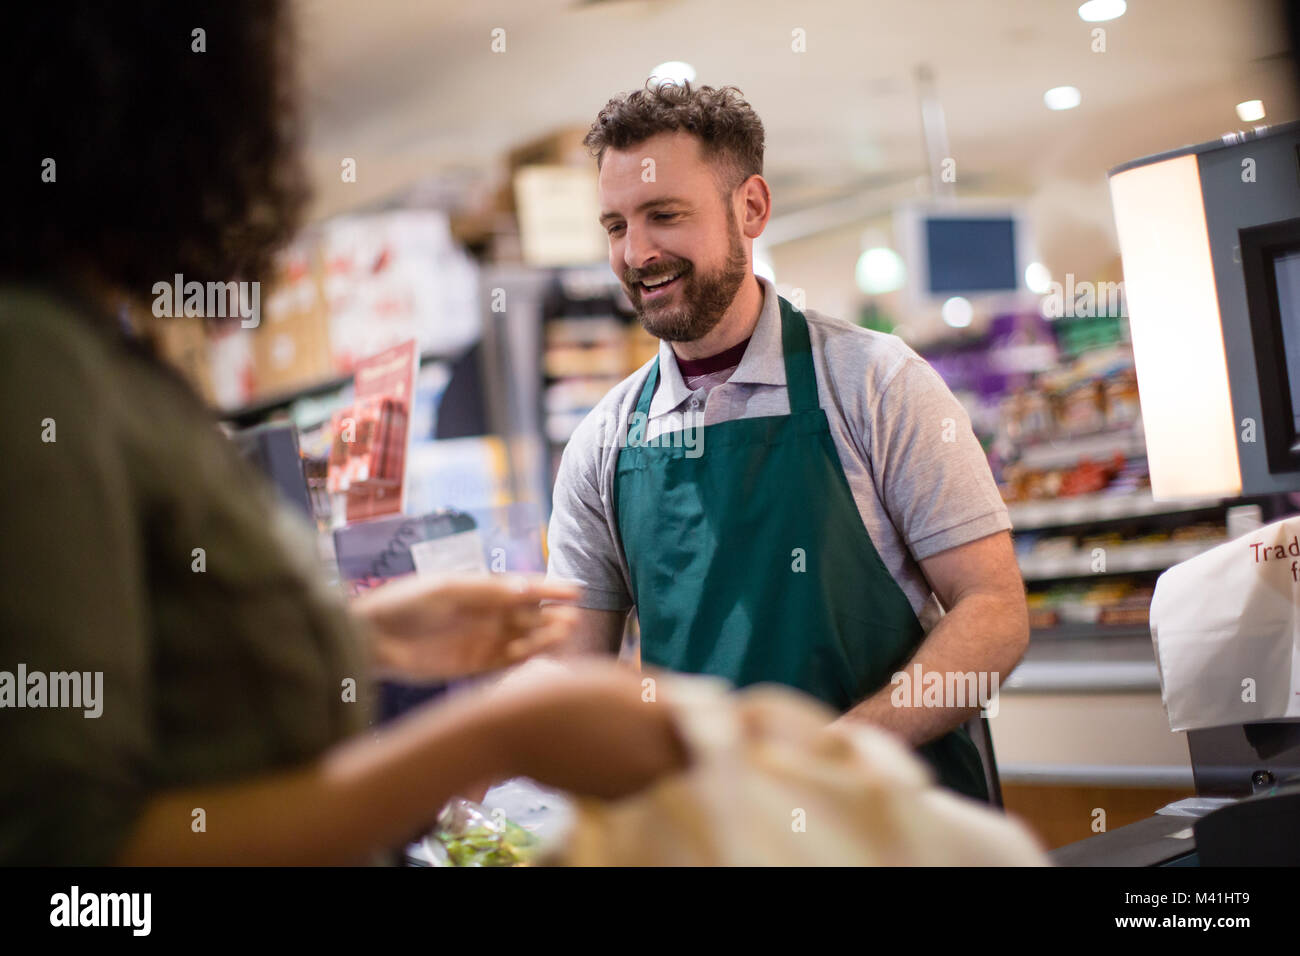 Woman at grocery checkout scan Stock Photo